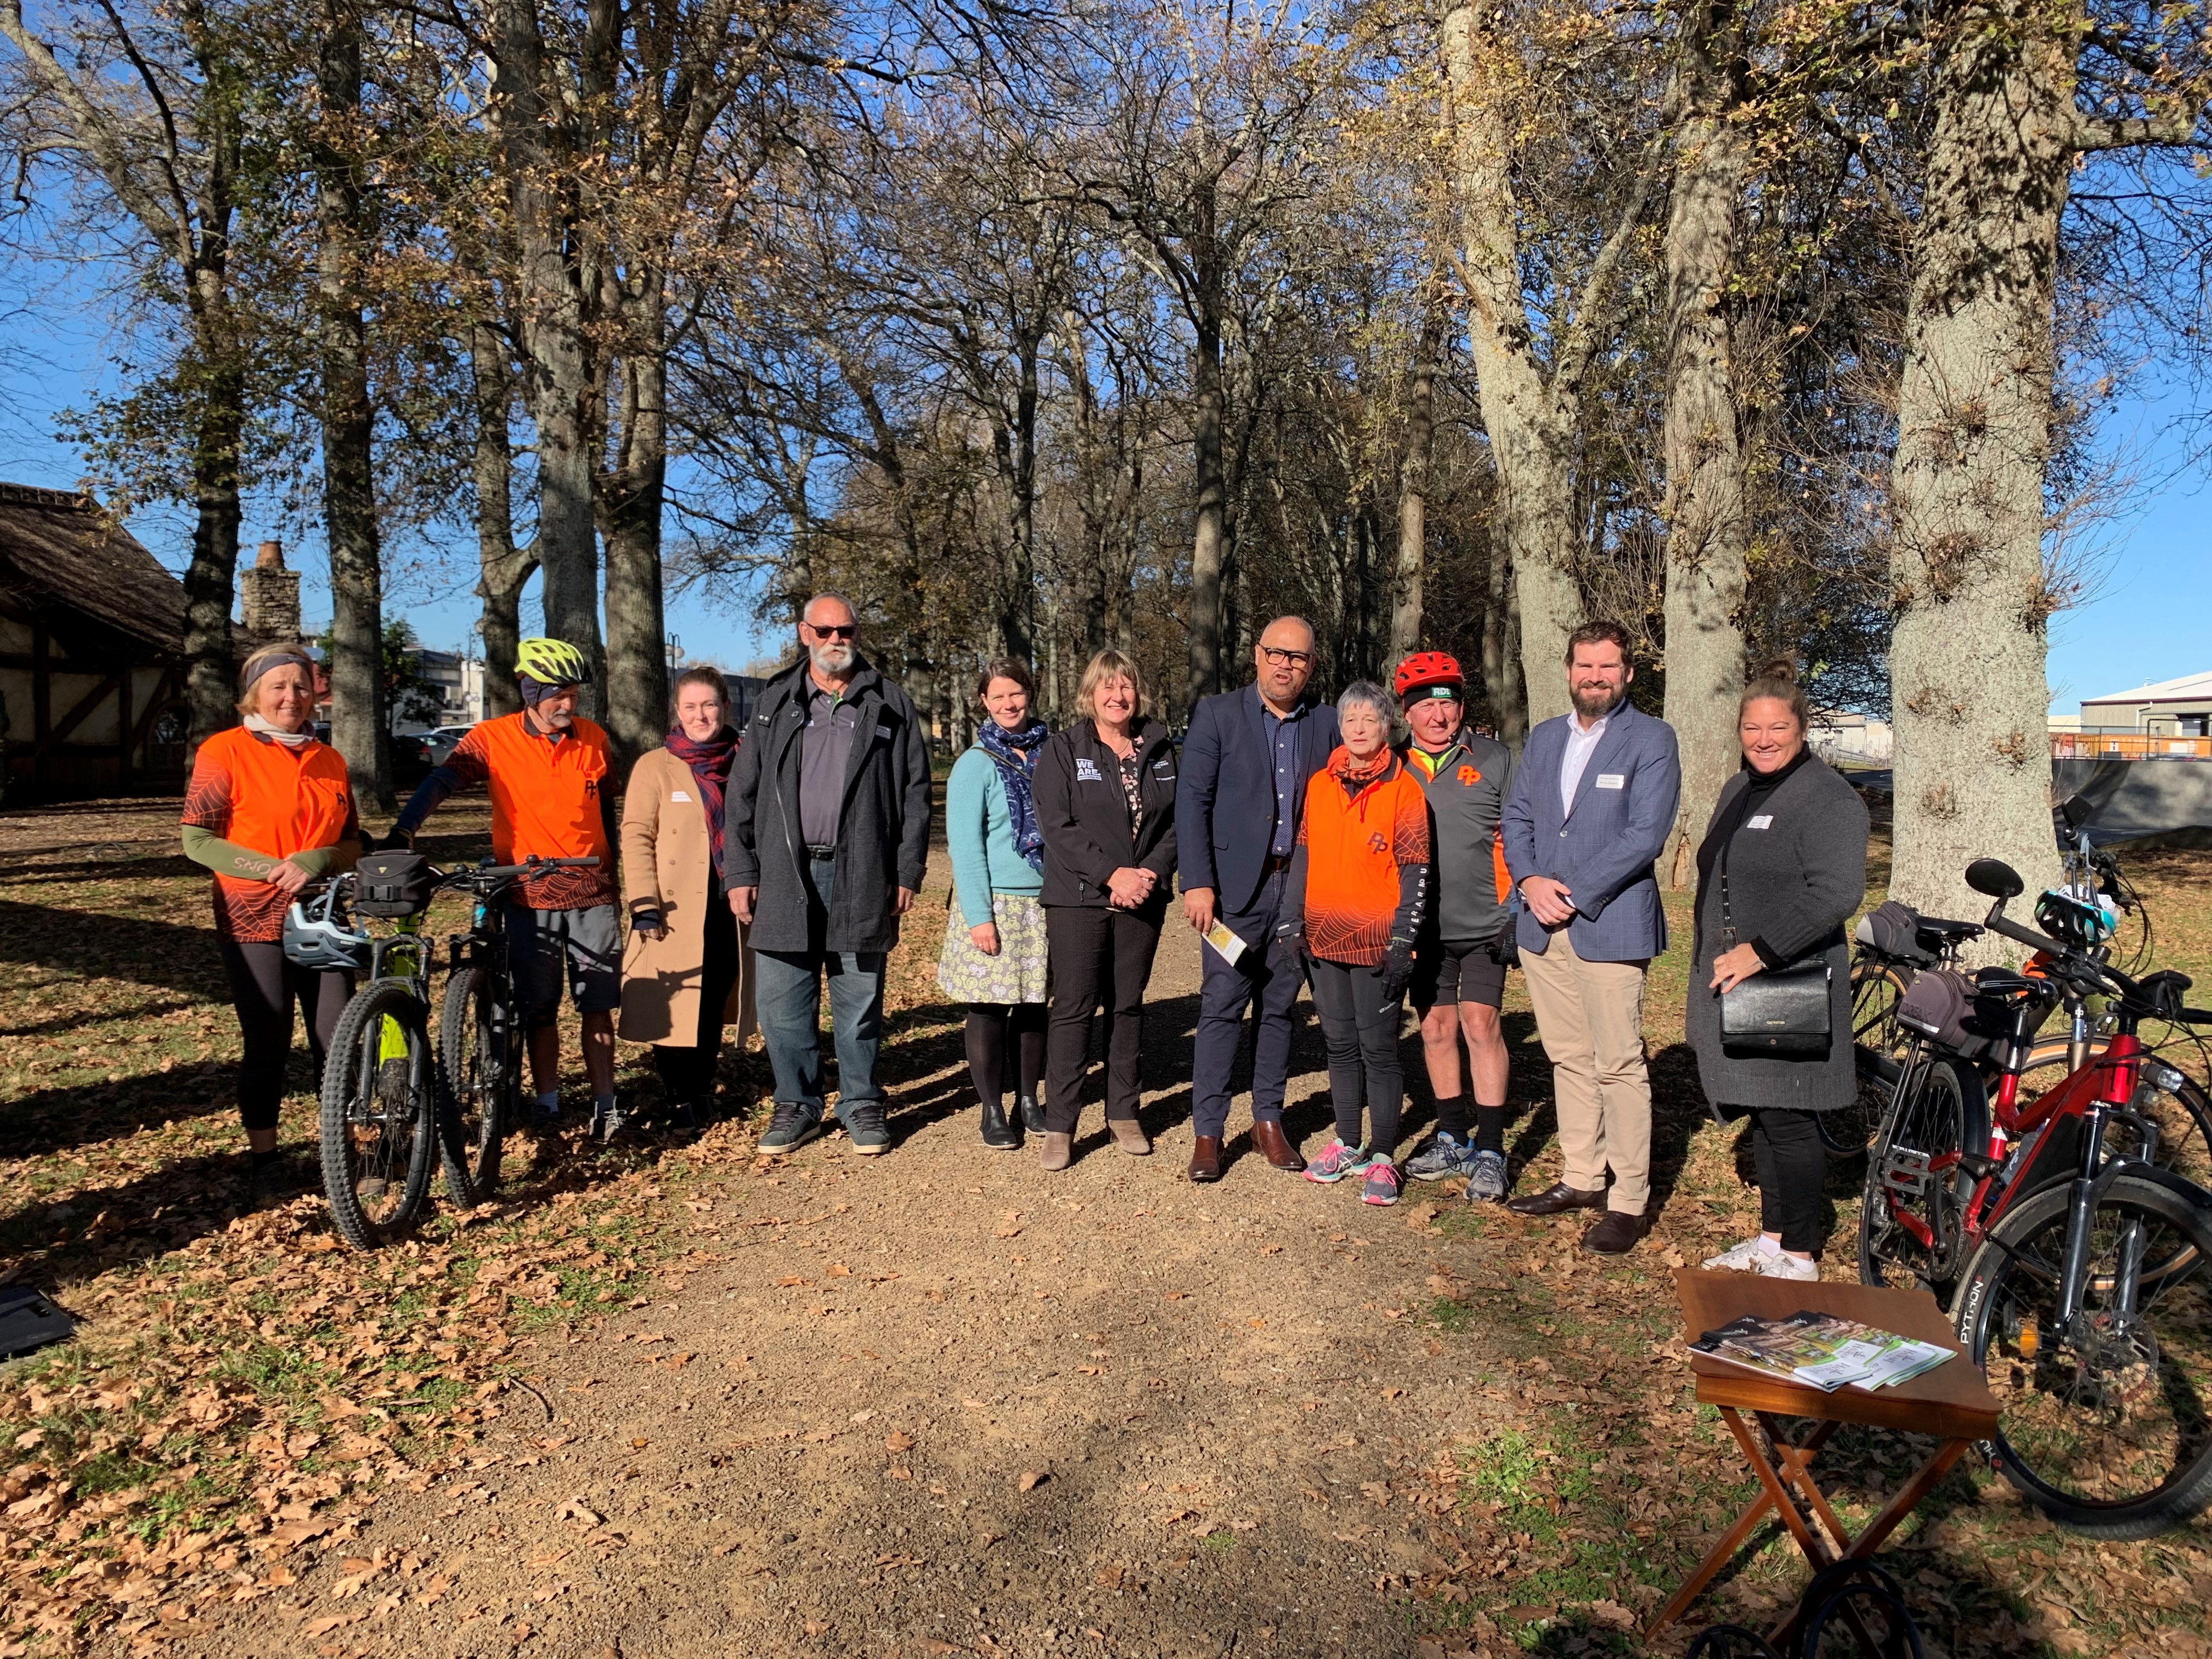 Members from the Piako Peddlers; HRT Charitable Trust Board; local government and the Mayor of Matamata-Piako stand with Tourism Minister Peeni Henare and MP for Waikato Tim van der Molen at the Hauraki Rail Trail in Matamata